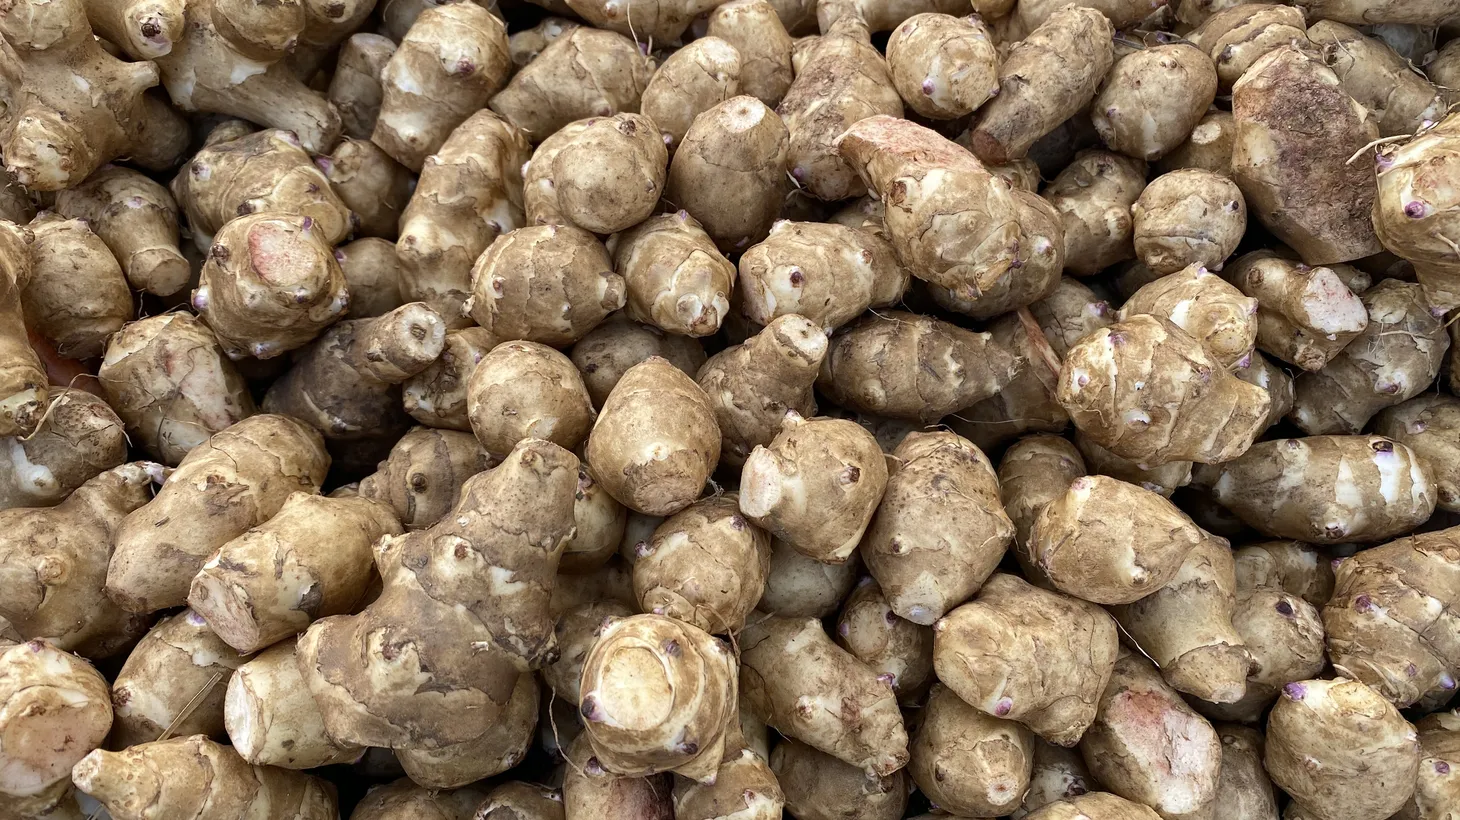 Alex Weiser likens the flavor of sunchokes to fresh jicama, cooked artichoke hearts, or sunflower seeds. They are comparable to a potato in their versatility.